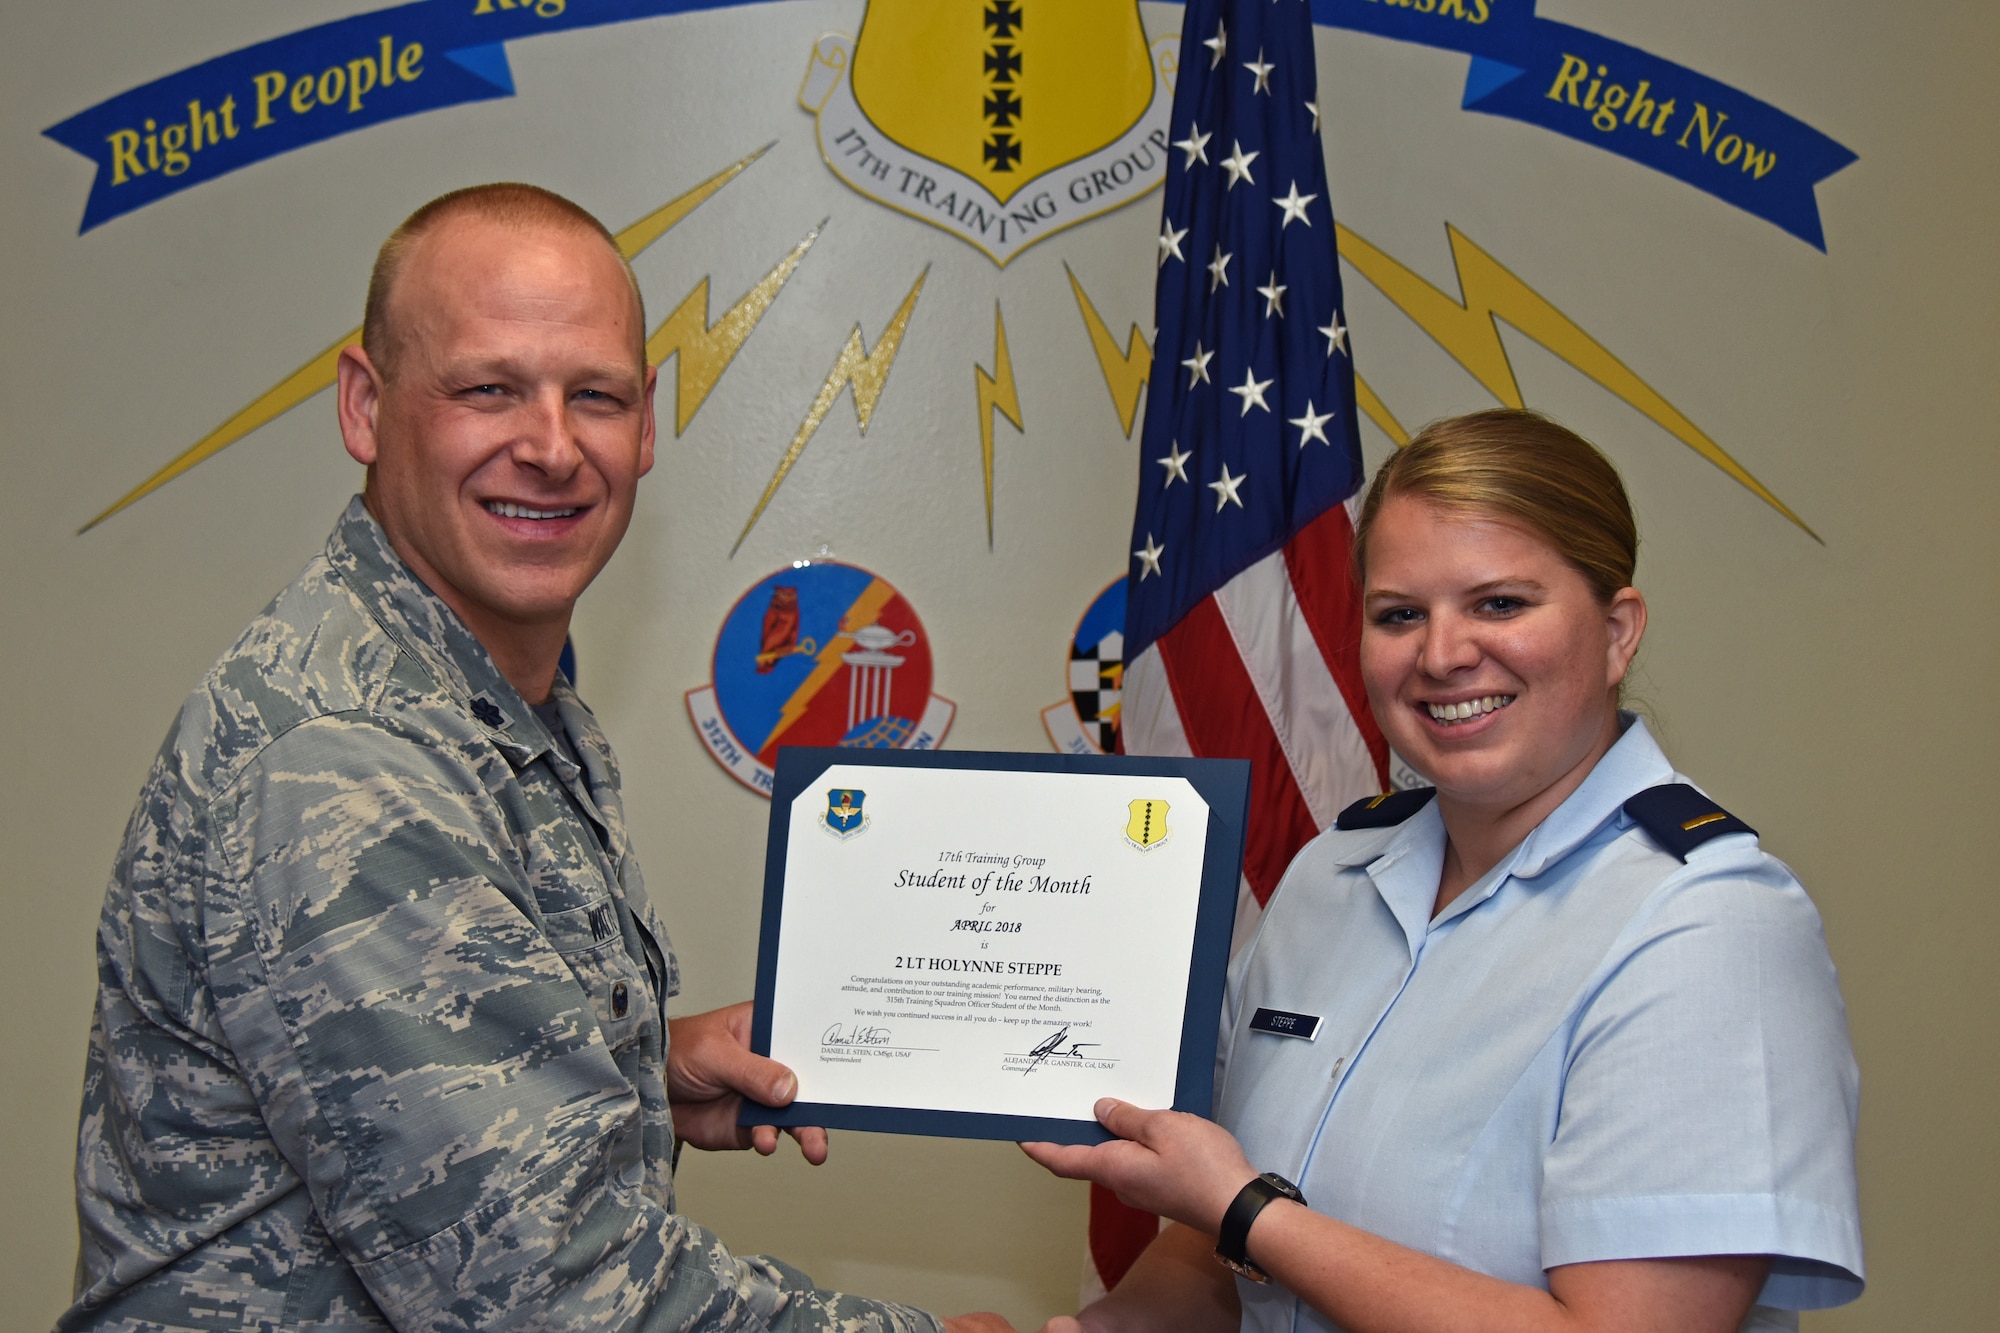 U.S. Air Force Lt. Col. Steven Watts, 17th Training Group deputy commander, presents the 315th Training Squadron Officer Student of the Month award to 2nd Lt. Holynne Steppe, 315th TRS trainee, at Brandenburg Hall on Goodfellow Air Force Base, Texas, May 4, 2018. The 315th TRS’s vision is to develop combat-ready intelligence, surveillance and reconnaissance professionals and promote an innovative squadron culture and identity unmatched across the U.S. Air Force. (U.S. Air Force photo by Airman 1st Class Zachary Chapman/Released)